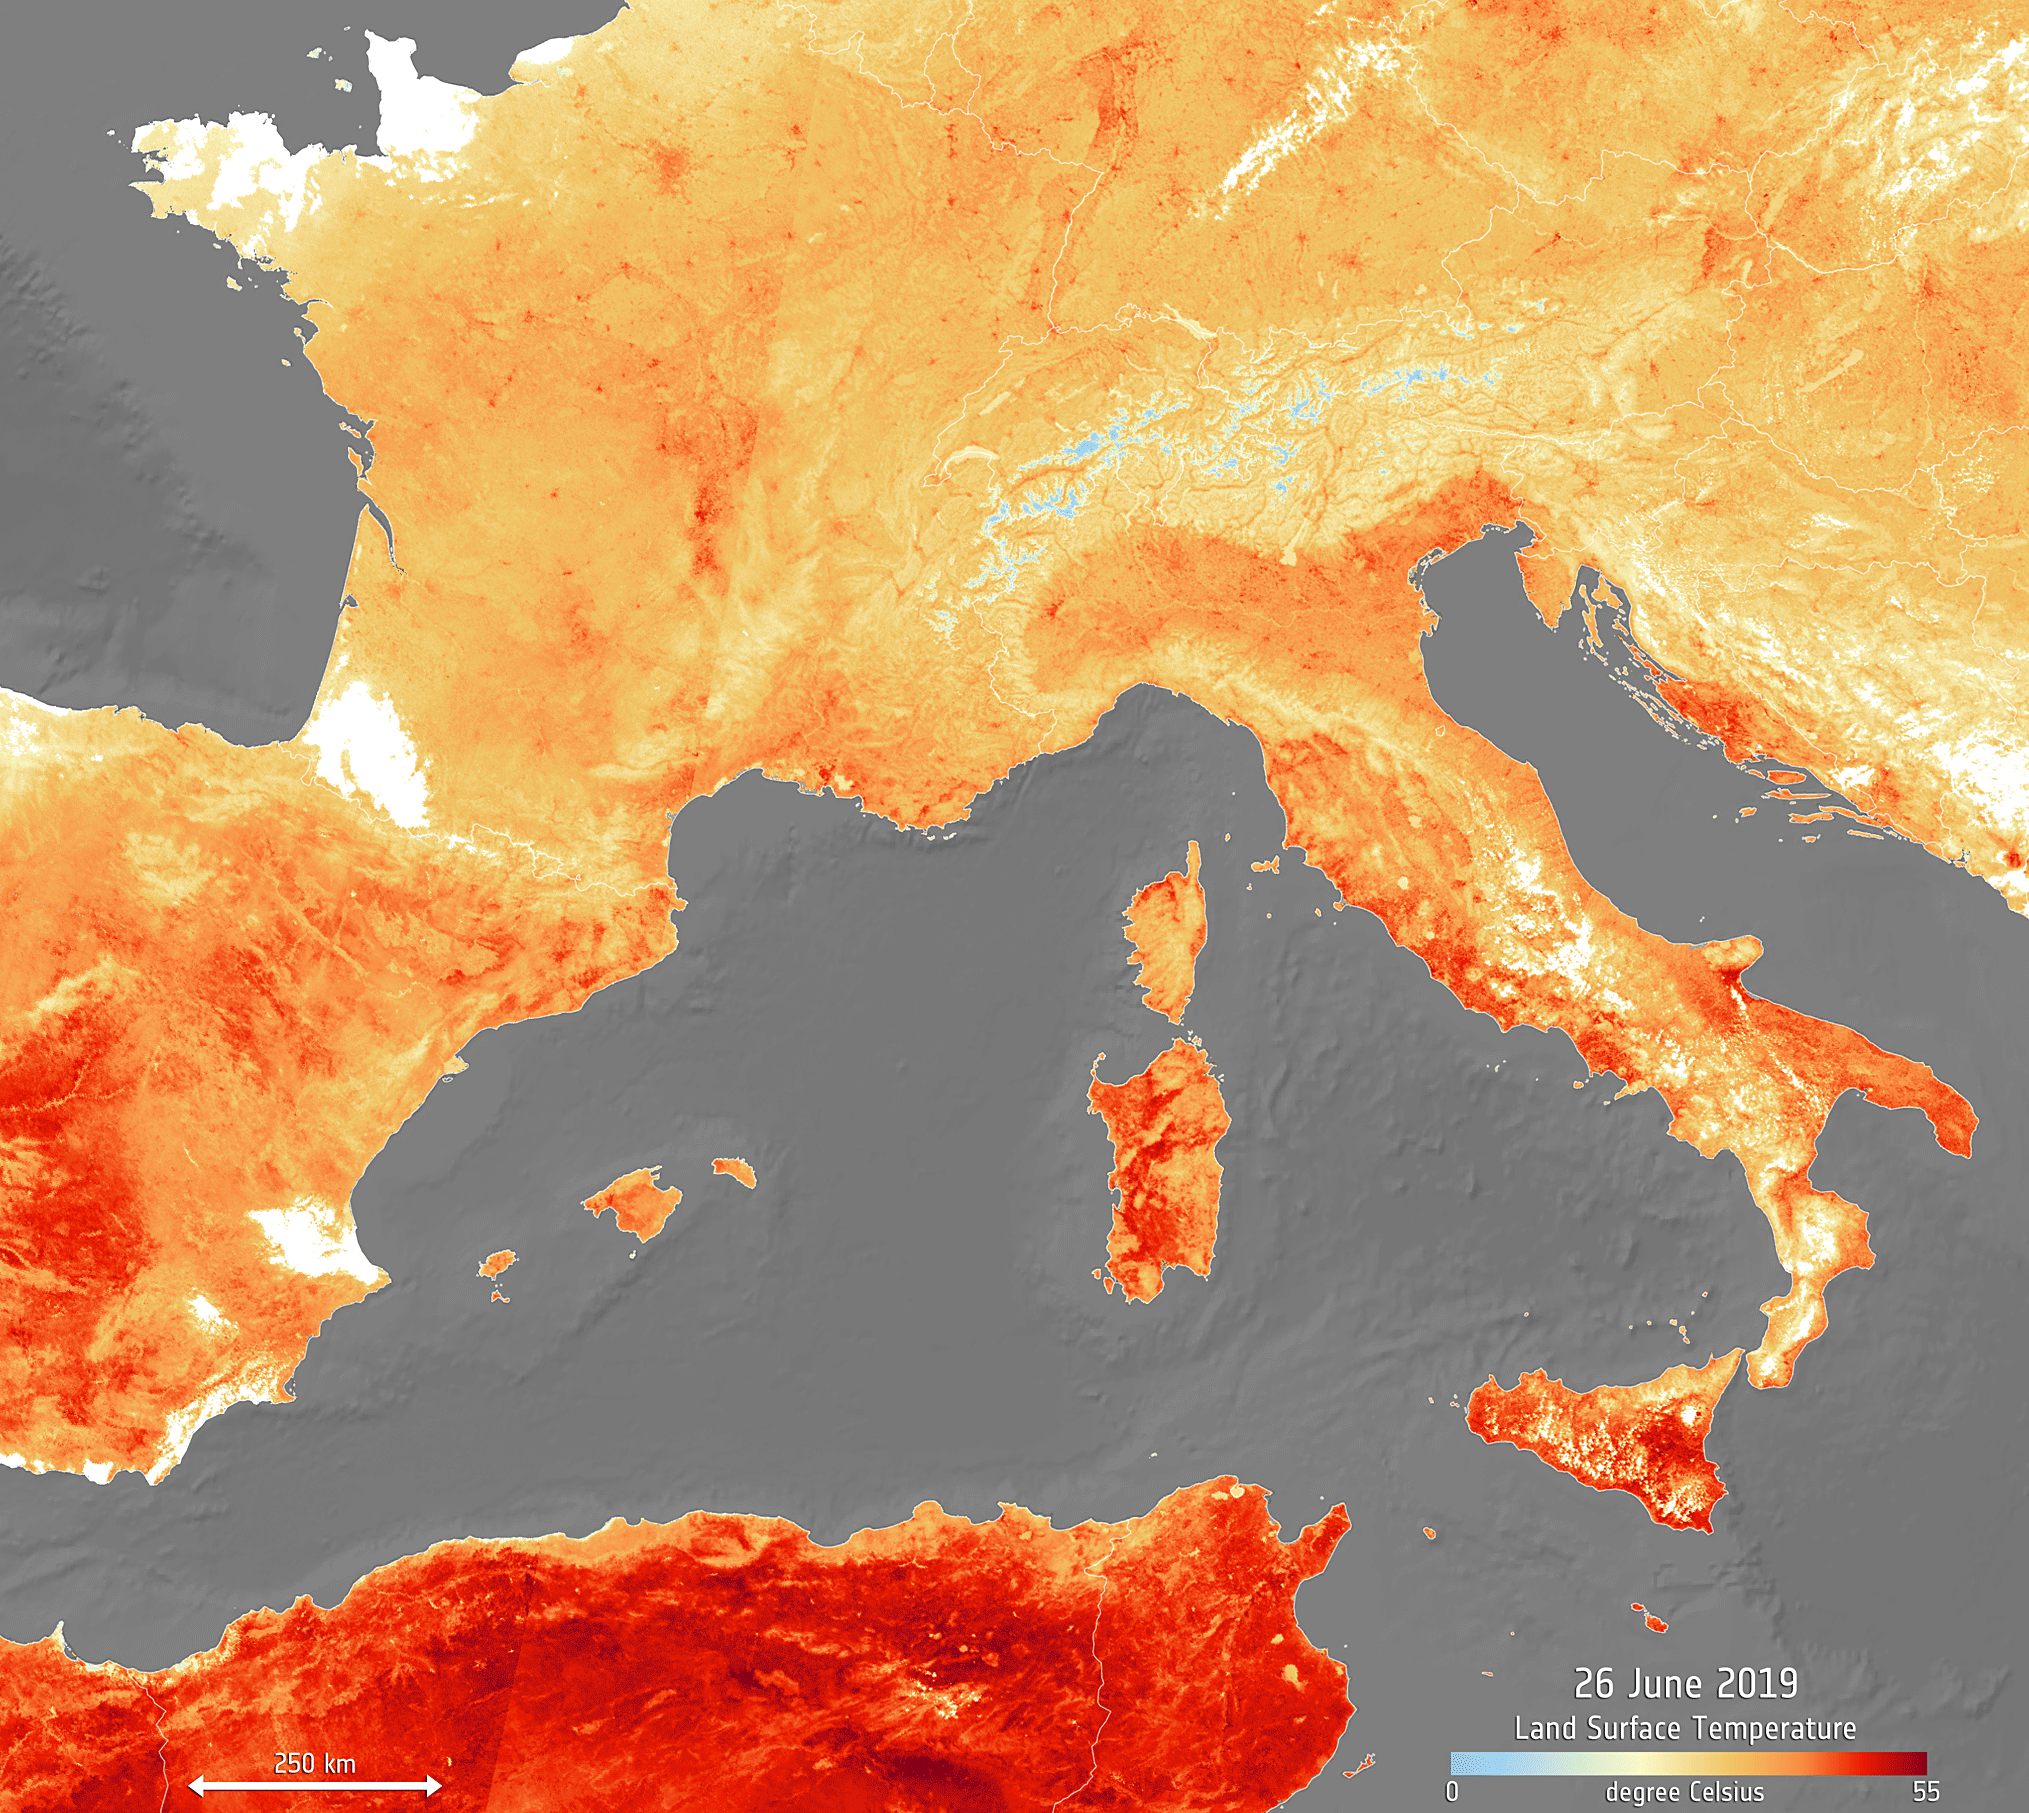 Figure 12: This animation of two images shows the land surface temperature from today 25 July, compared to data recorded during the previous heatwave on 26 June 2019 (image credit: ESA, the image contains modified Copernicus Sentinel data (2019), processed by ESA, CC BY-SA 3.0 IGO)